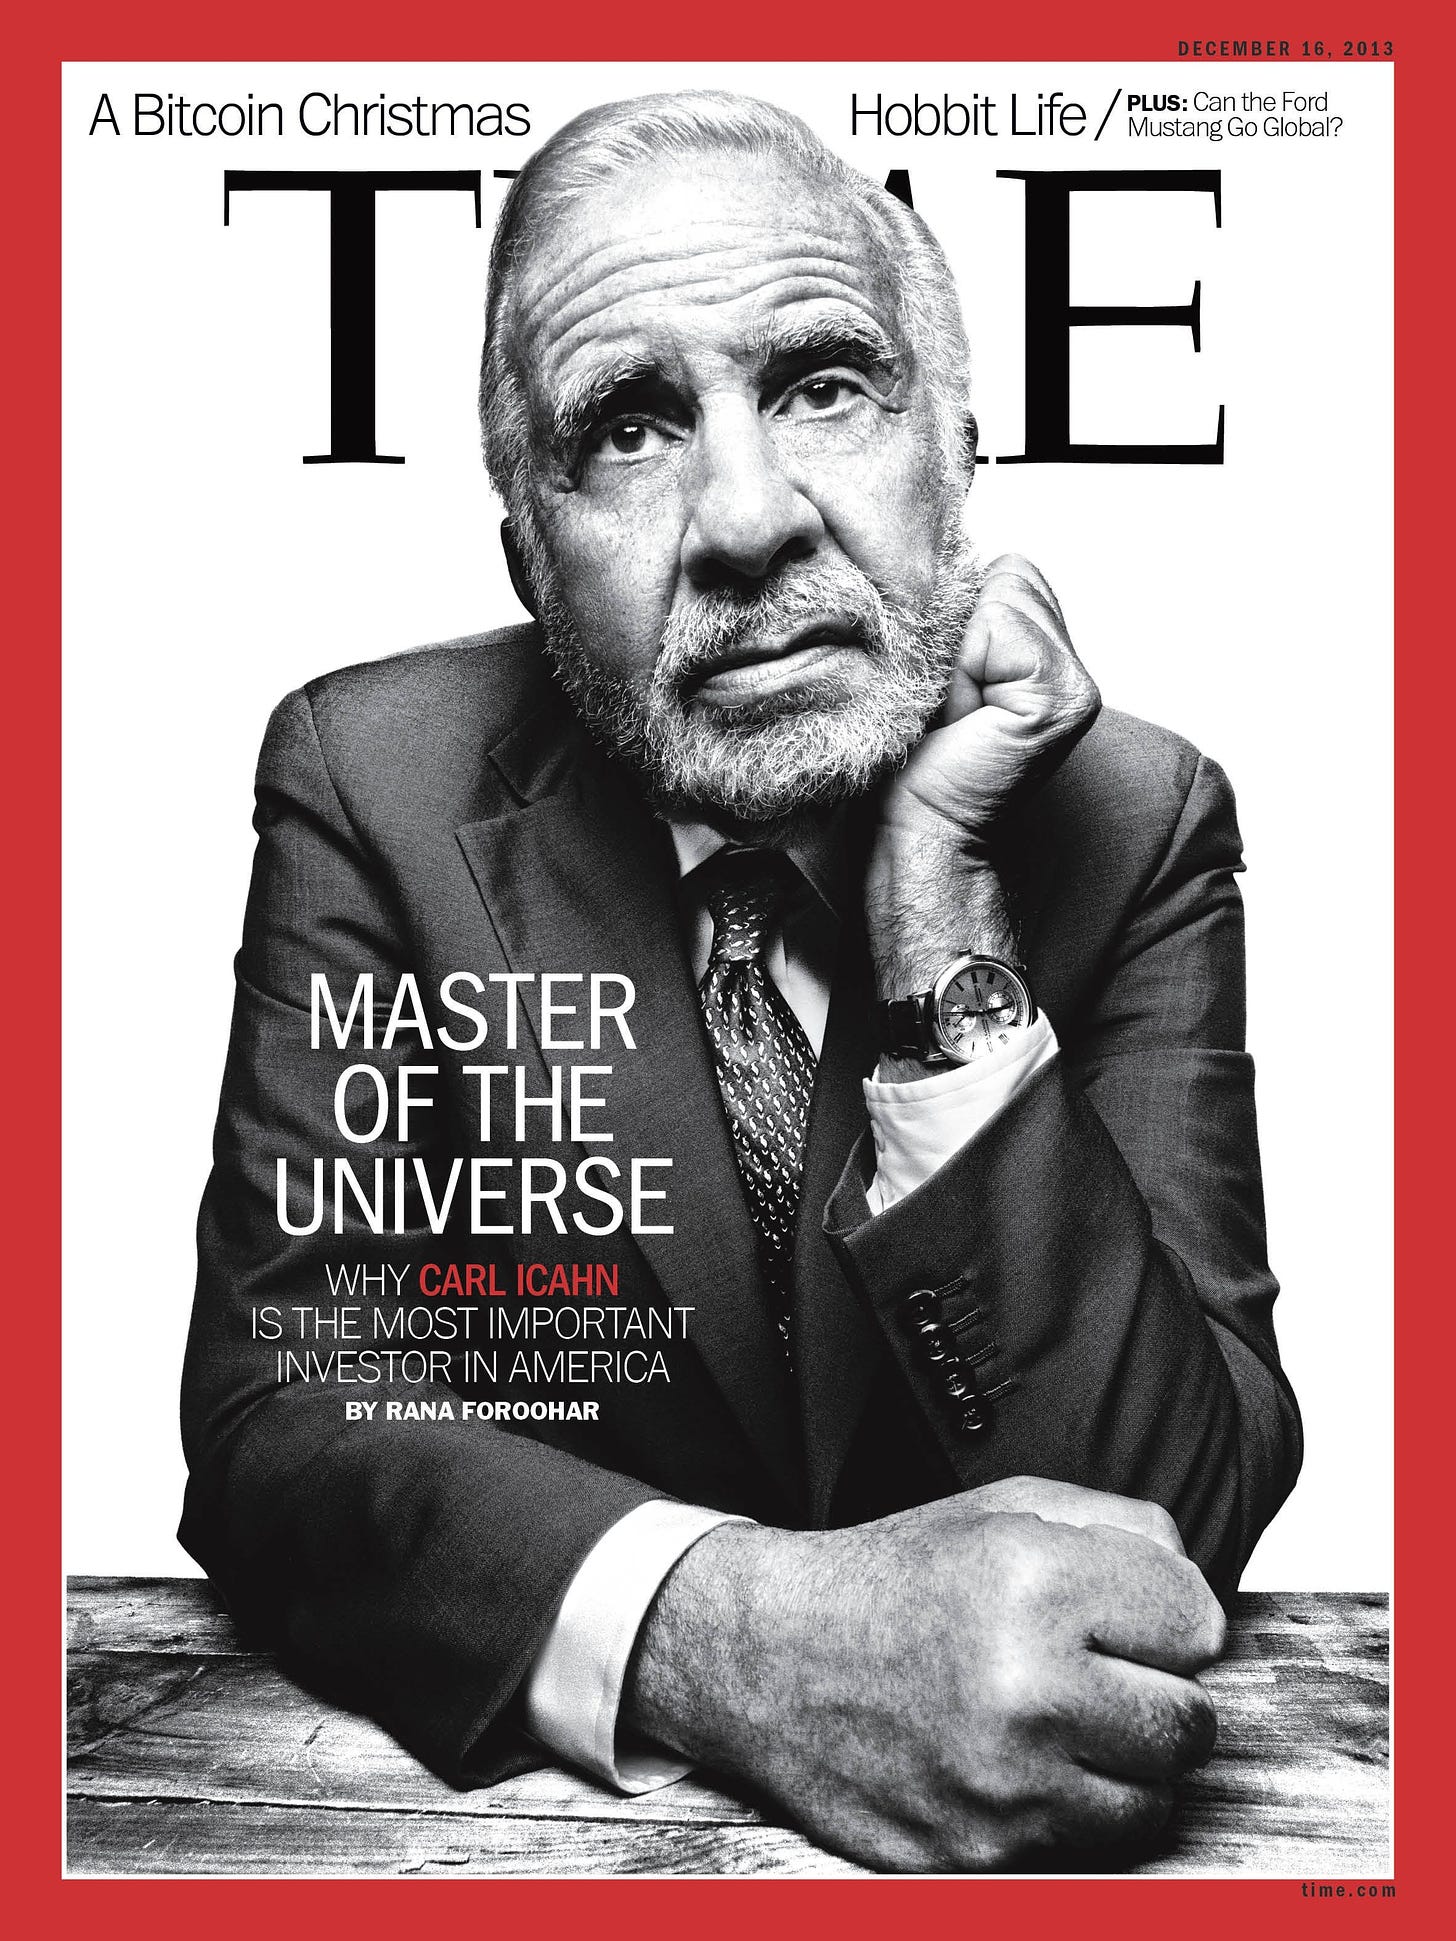 [Identify] Carl Icahn's watch on the cover of Time Magazine : Watches